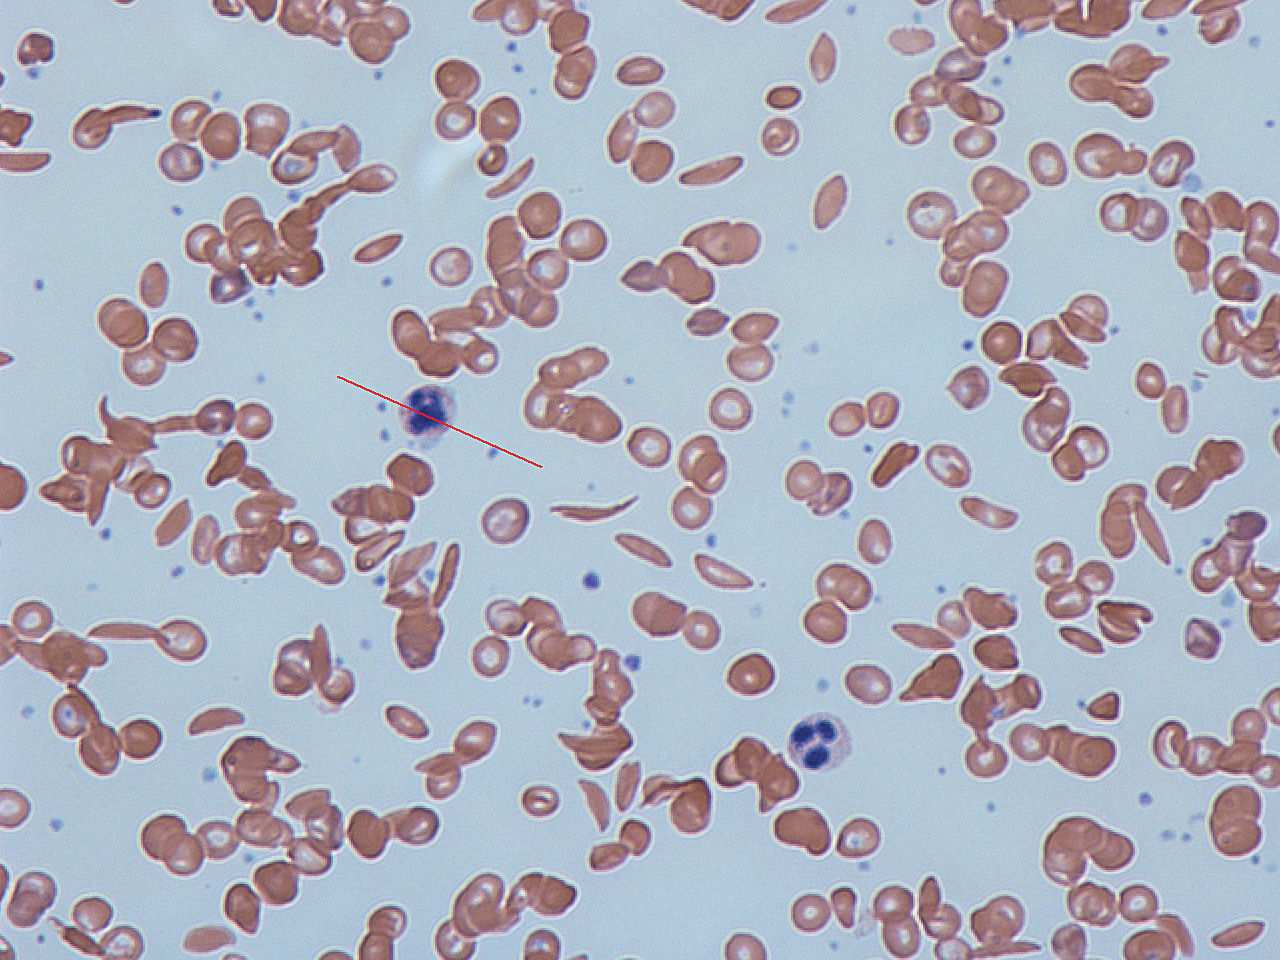 micrograph showing both healthy round red blood cells and sickle-shaped cells